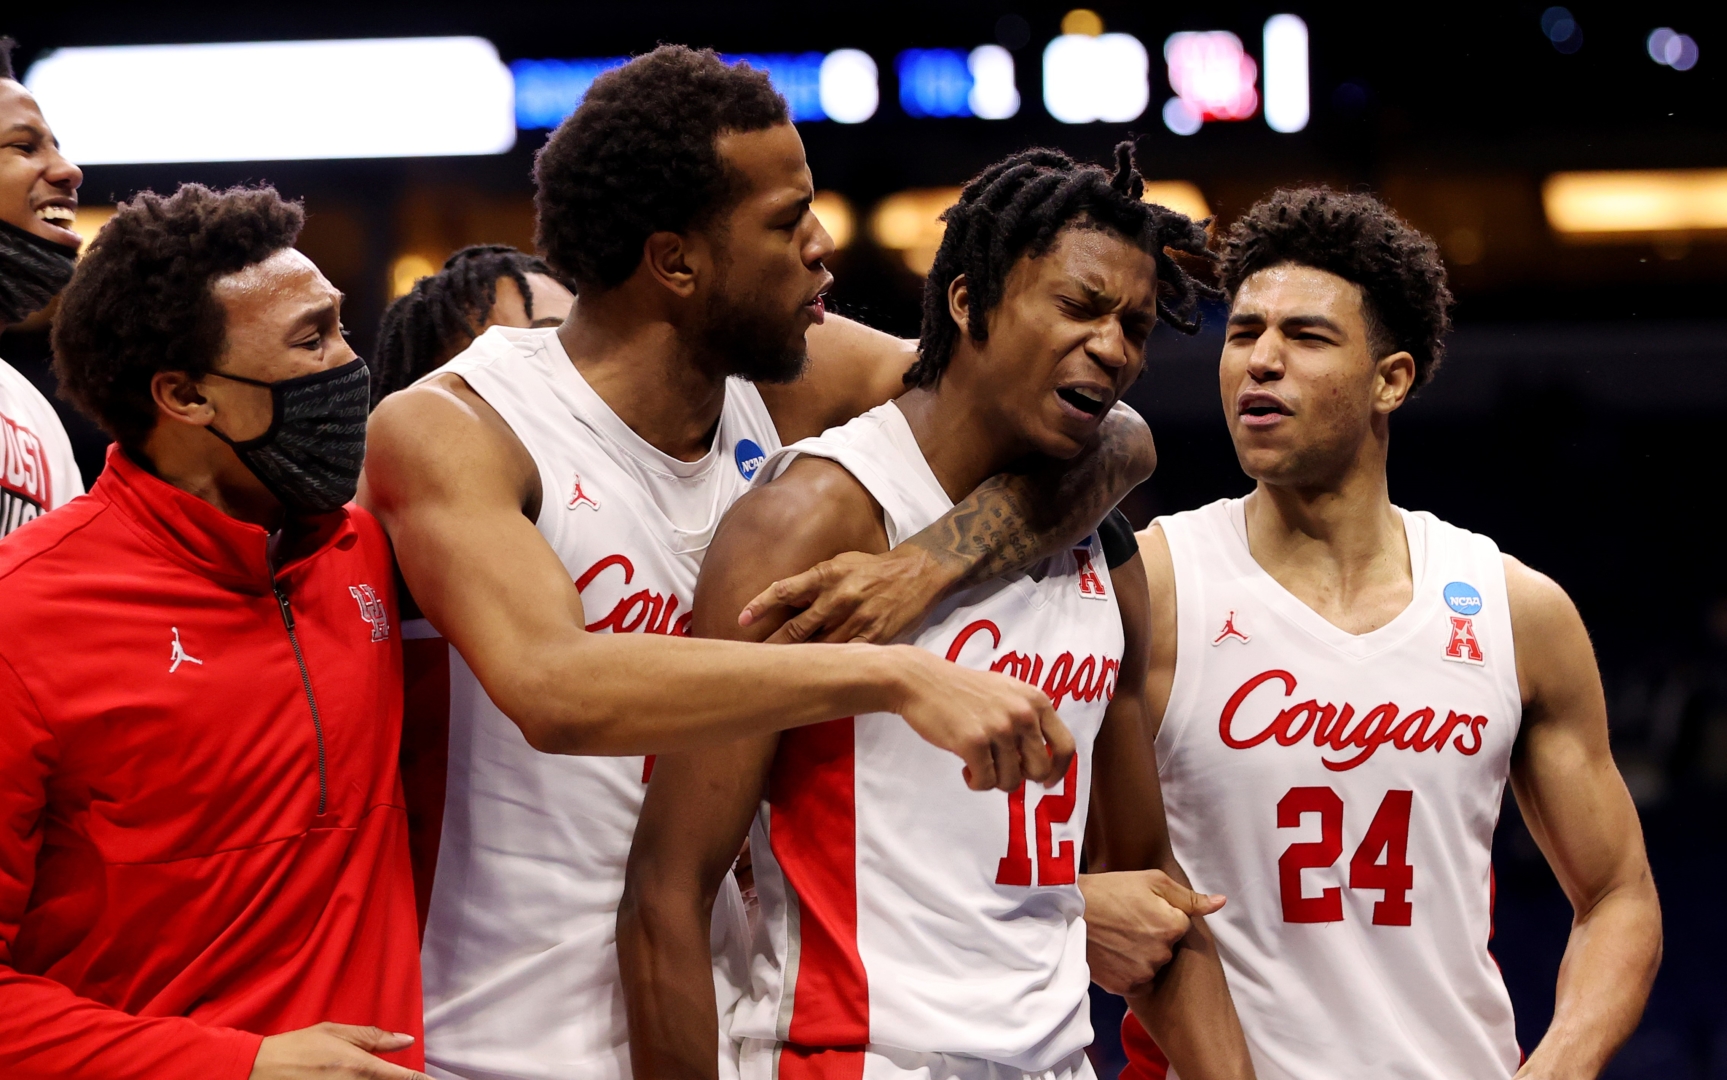 Justin Gorham (left) and Quentin Grimes (right) celebrate around freshman Tramon Mark (middle) after the Cougars' last-minute comeback win over Rutgers in the round of 32 in the NCAA Tournament at Lucas Oil Stadium on March 21, 2021 in Indianapolis, Indiana. | Photo by Jamie Schwaberow/NCAA Photos via Getty Images